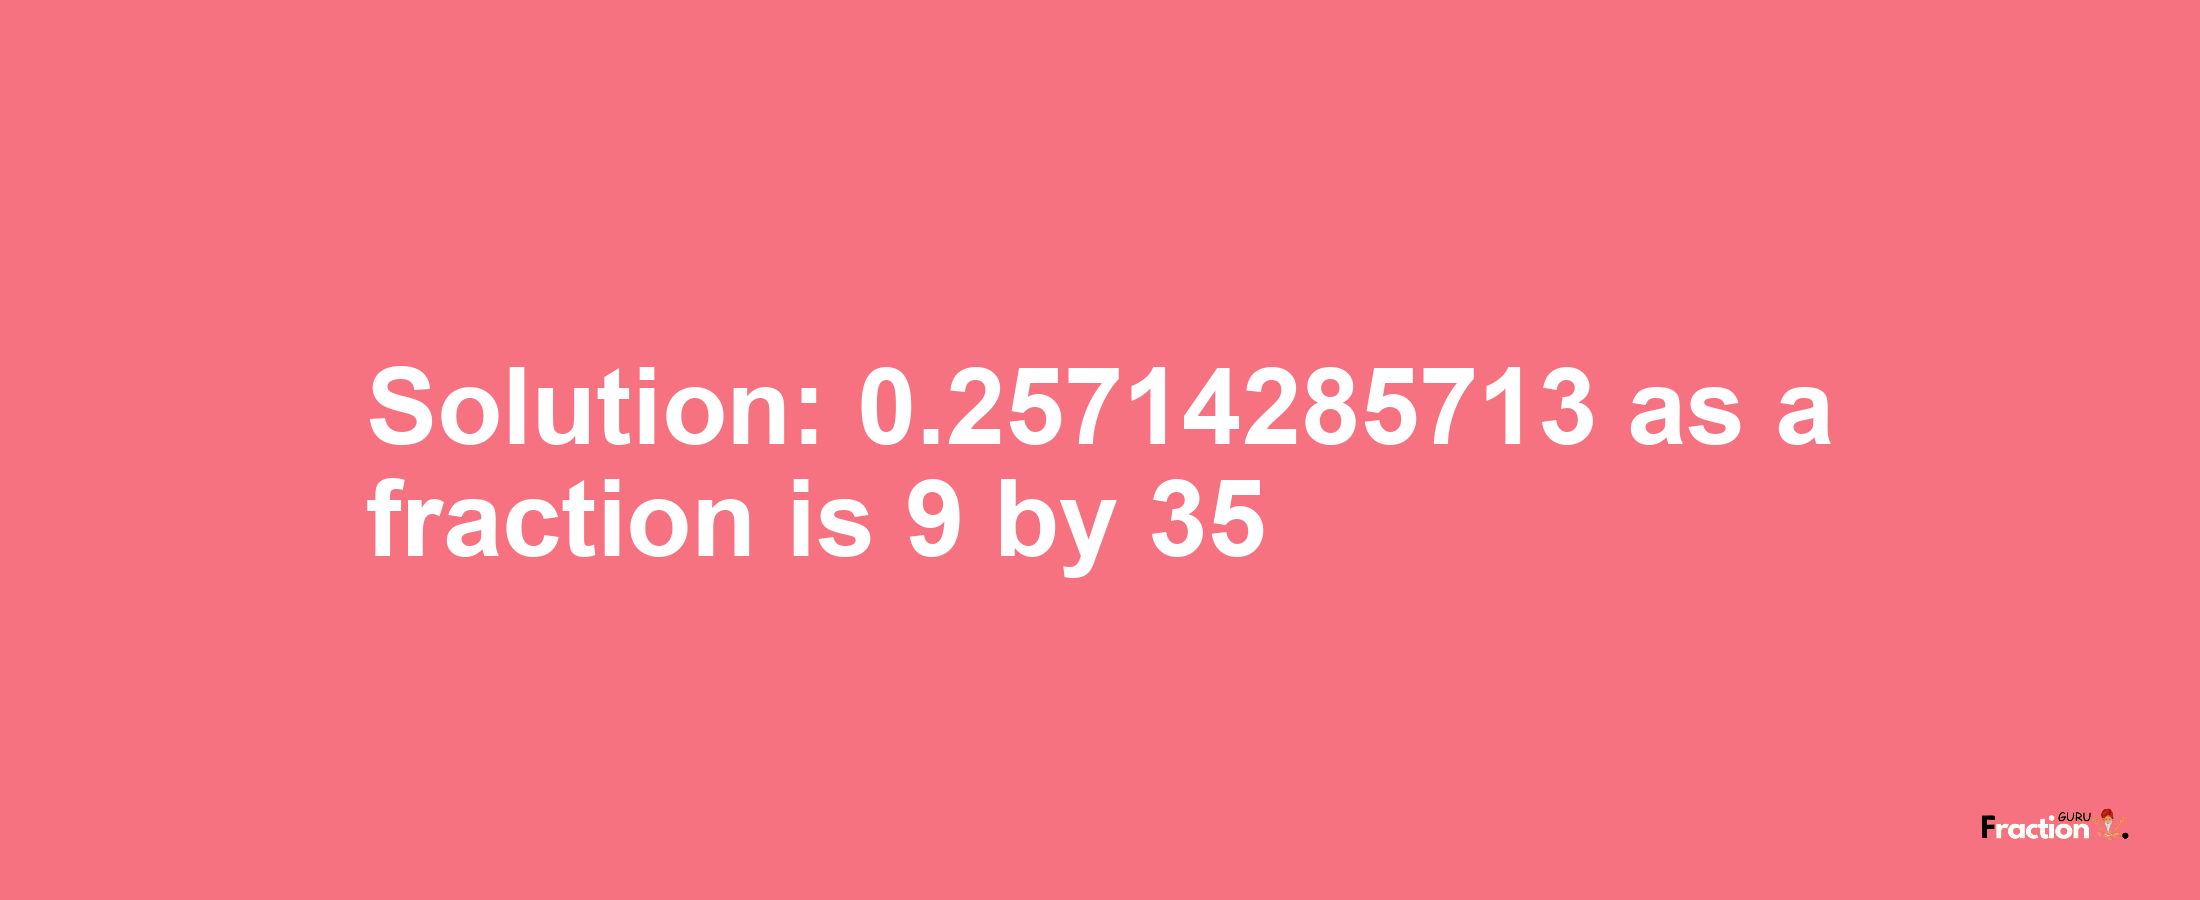 Solution:0.25714285713 as a fraction is 9/35